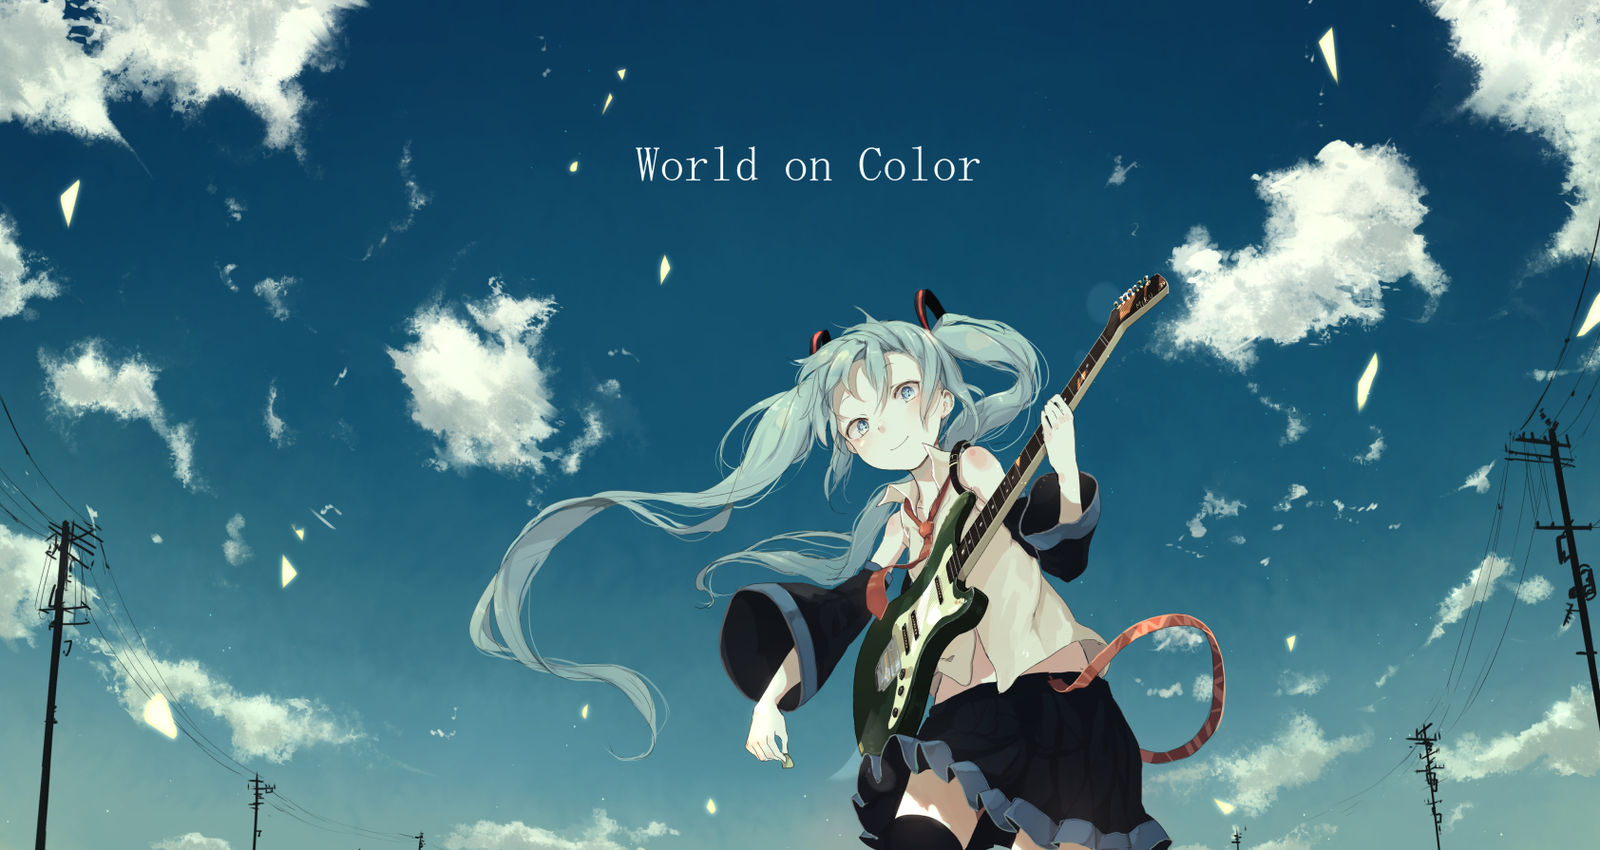 World on Color